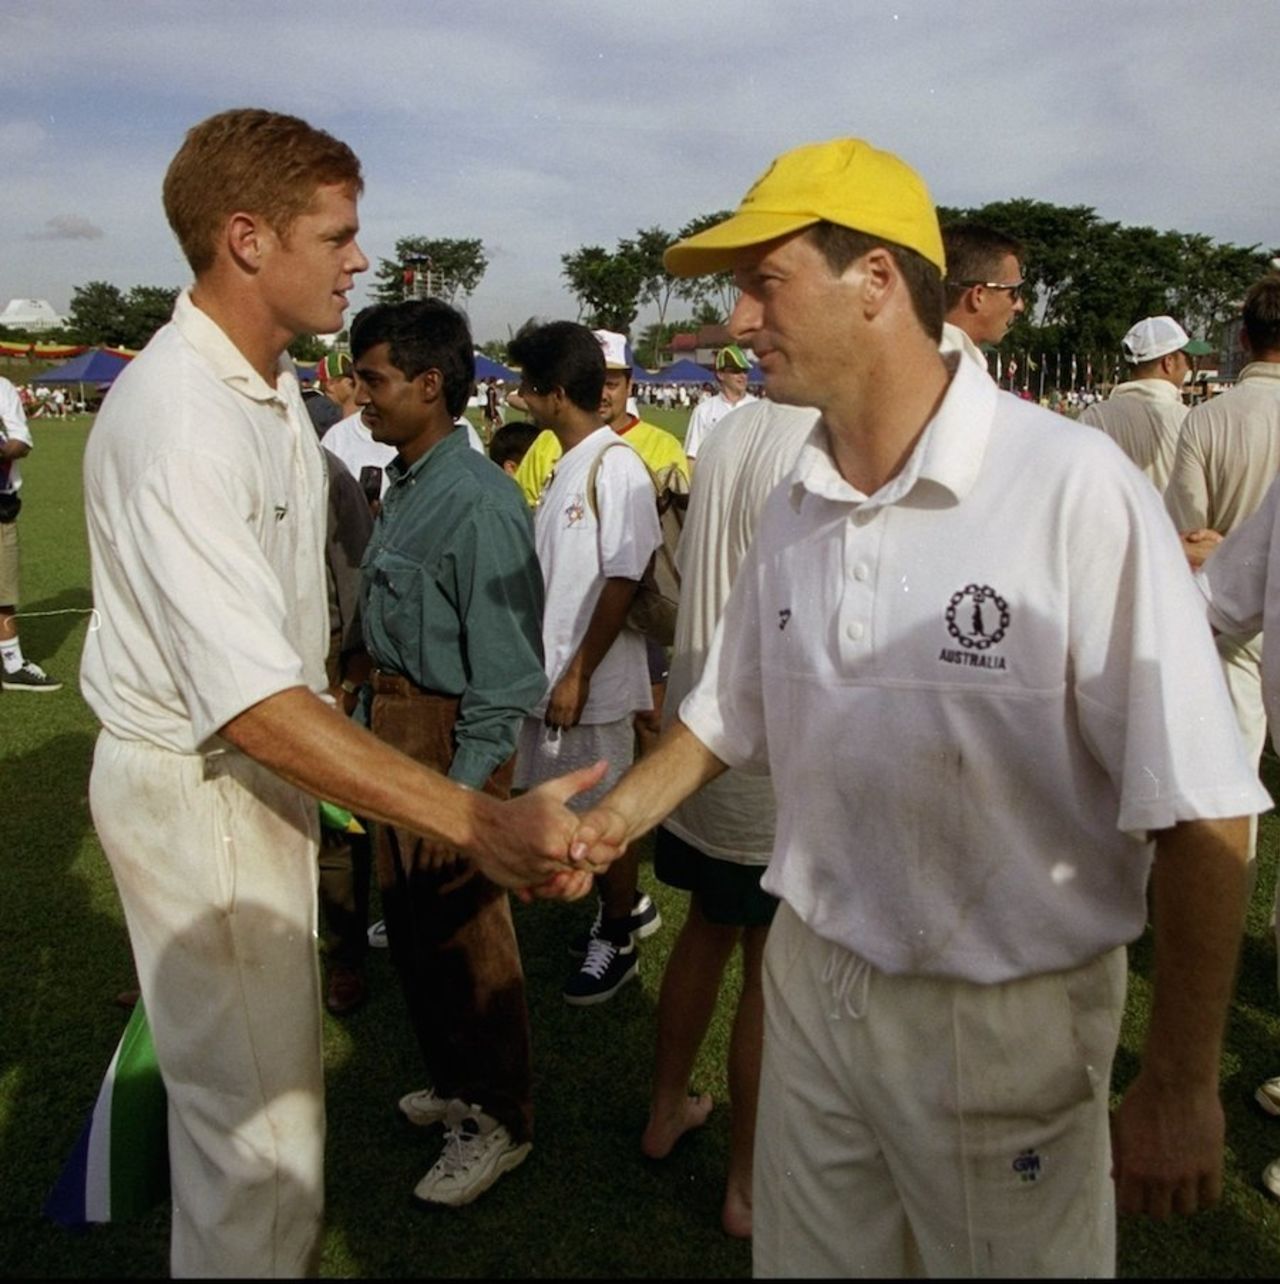 Shaun Pollock and Steve Waugh shake hands after the cricket final during the Commonwealth Games in Kuala Lumpur, Kuala Lumpur, September 19, 1998